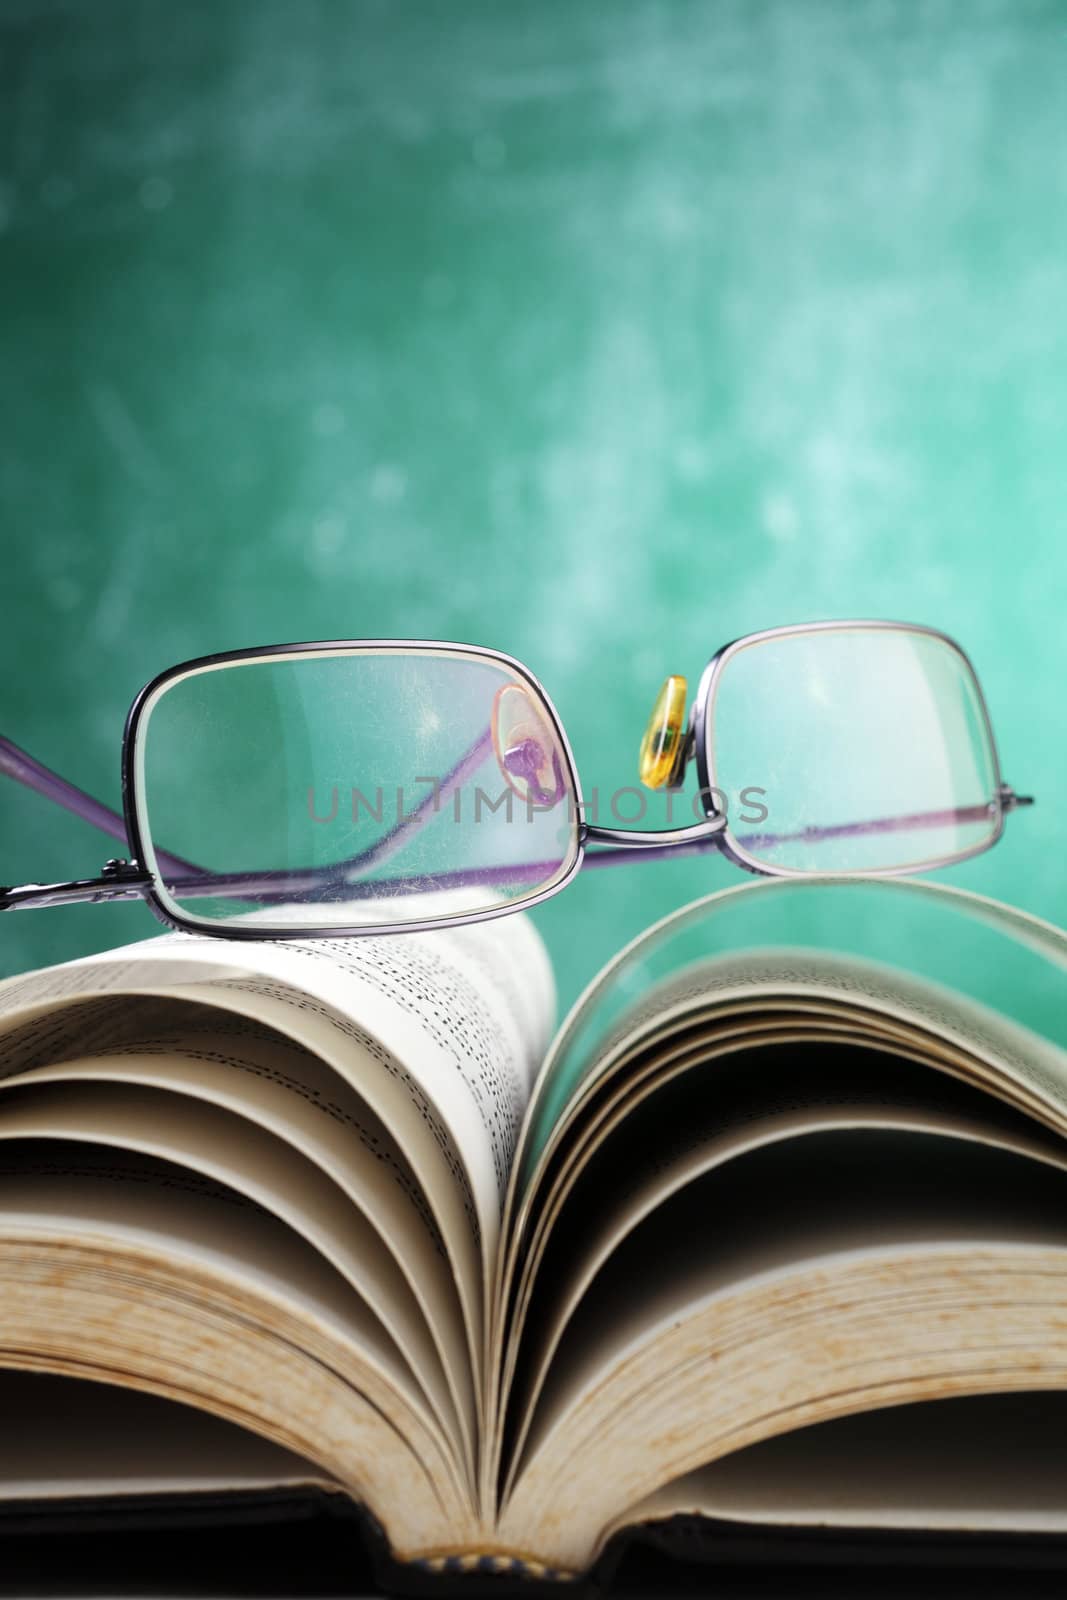 slelective focus on the spectacles on the book